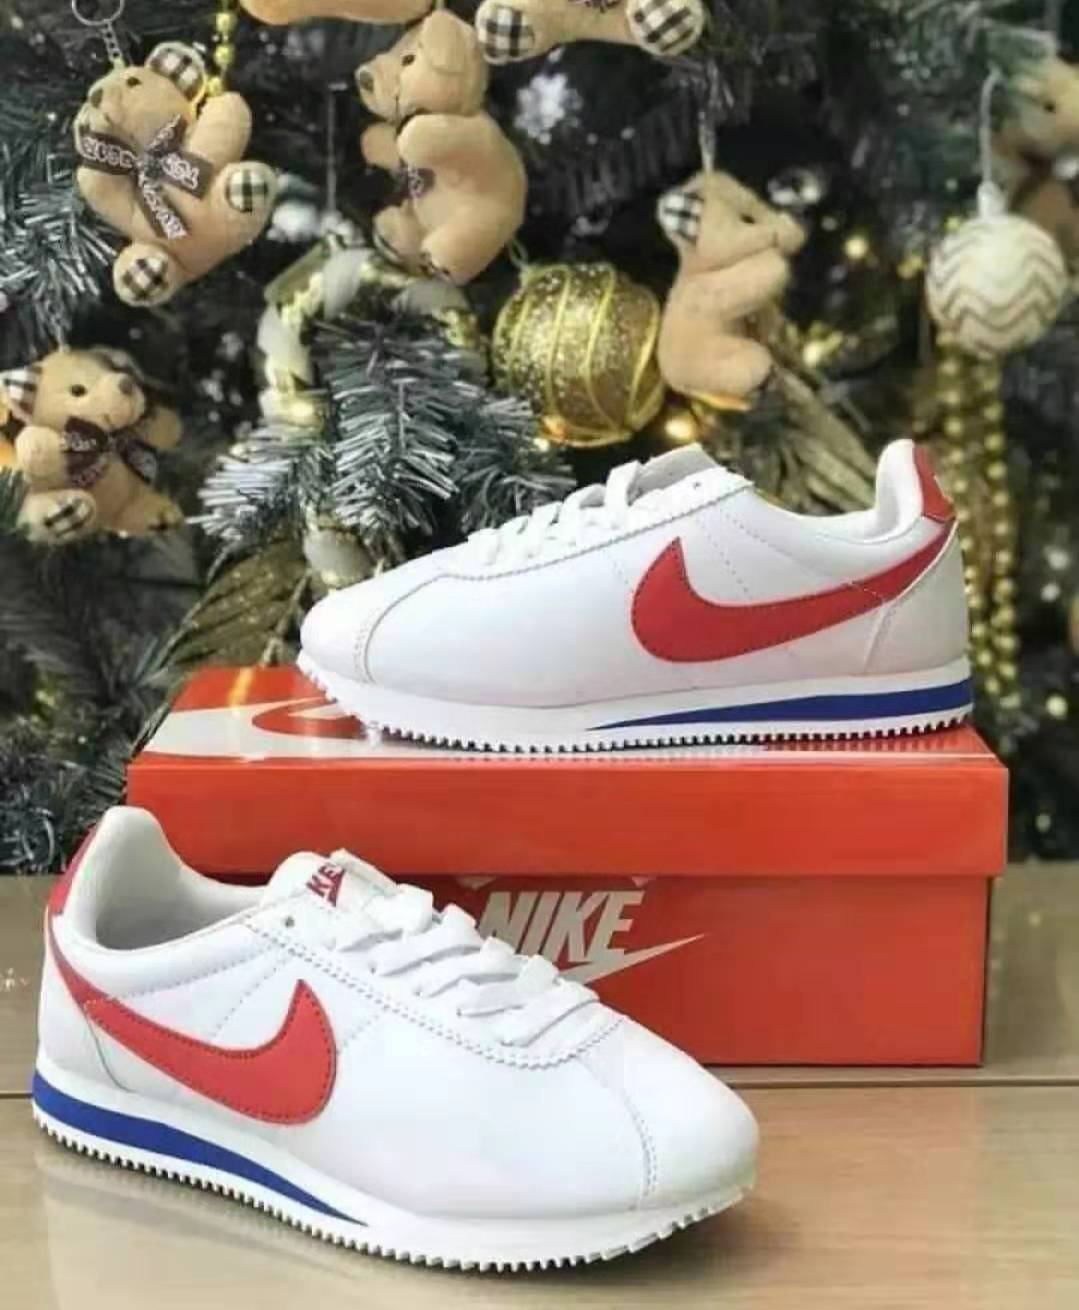 Nike \u003dCortez sports running shoes for 